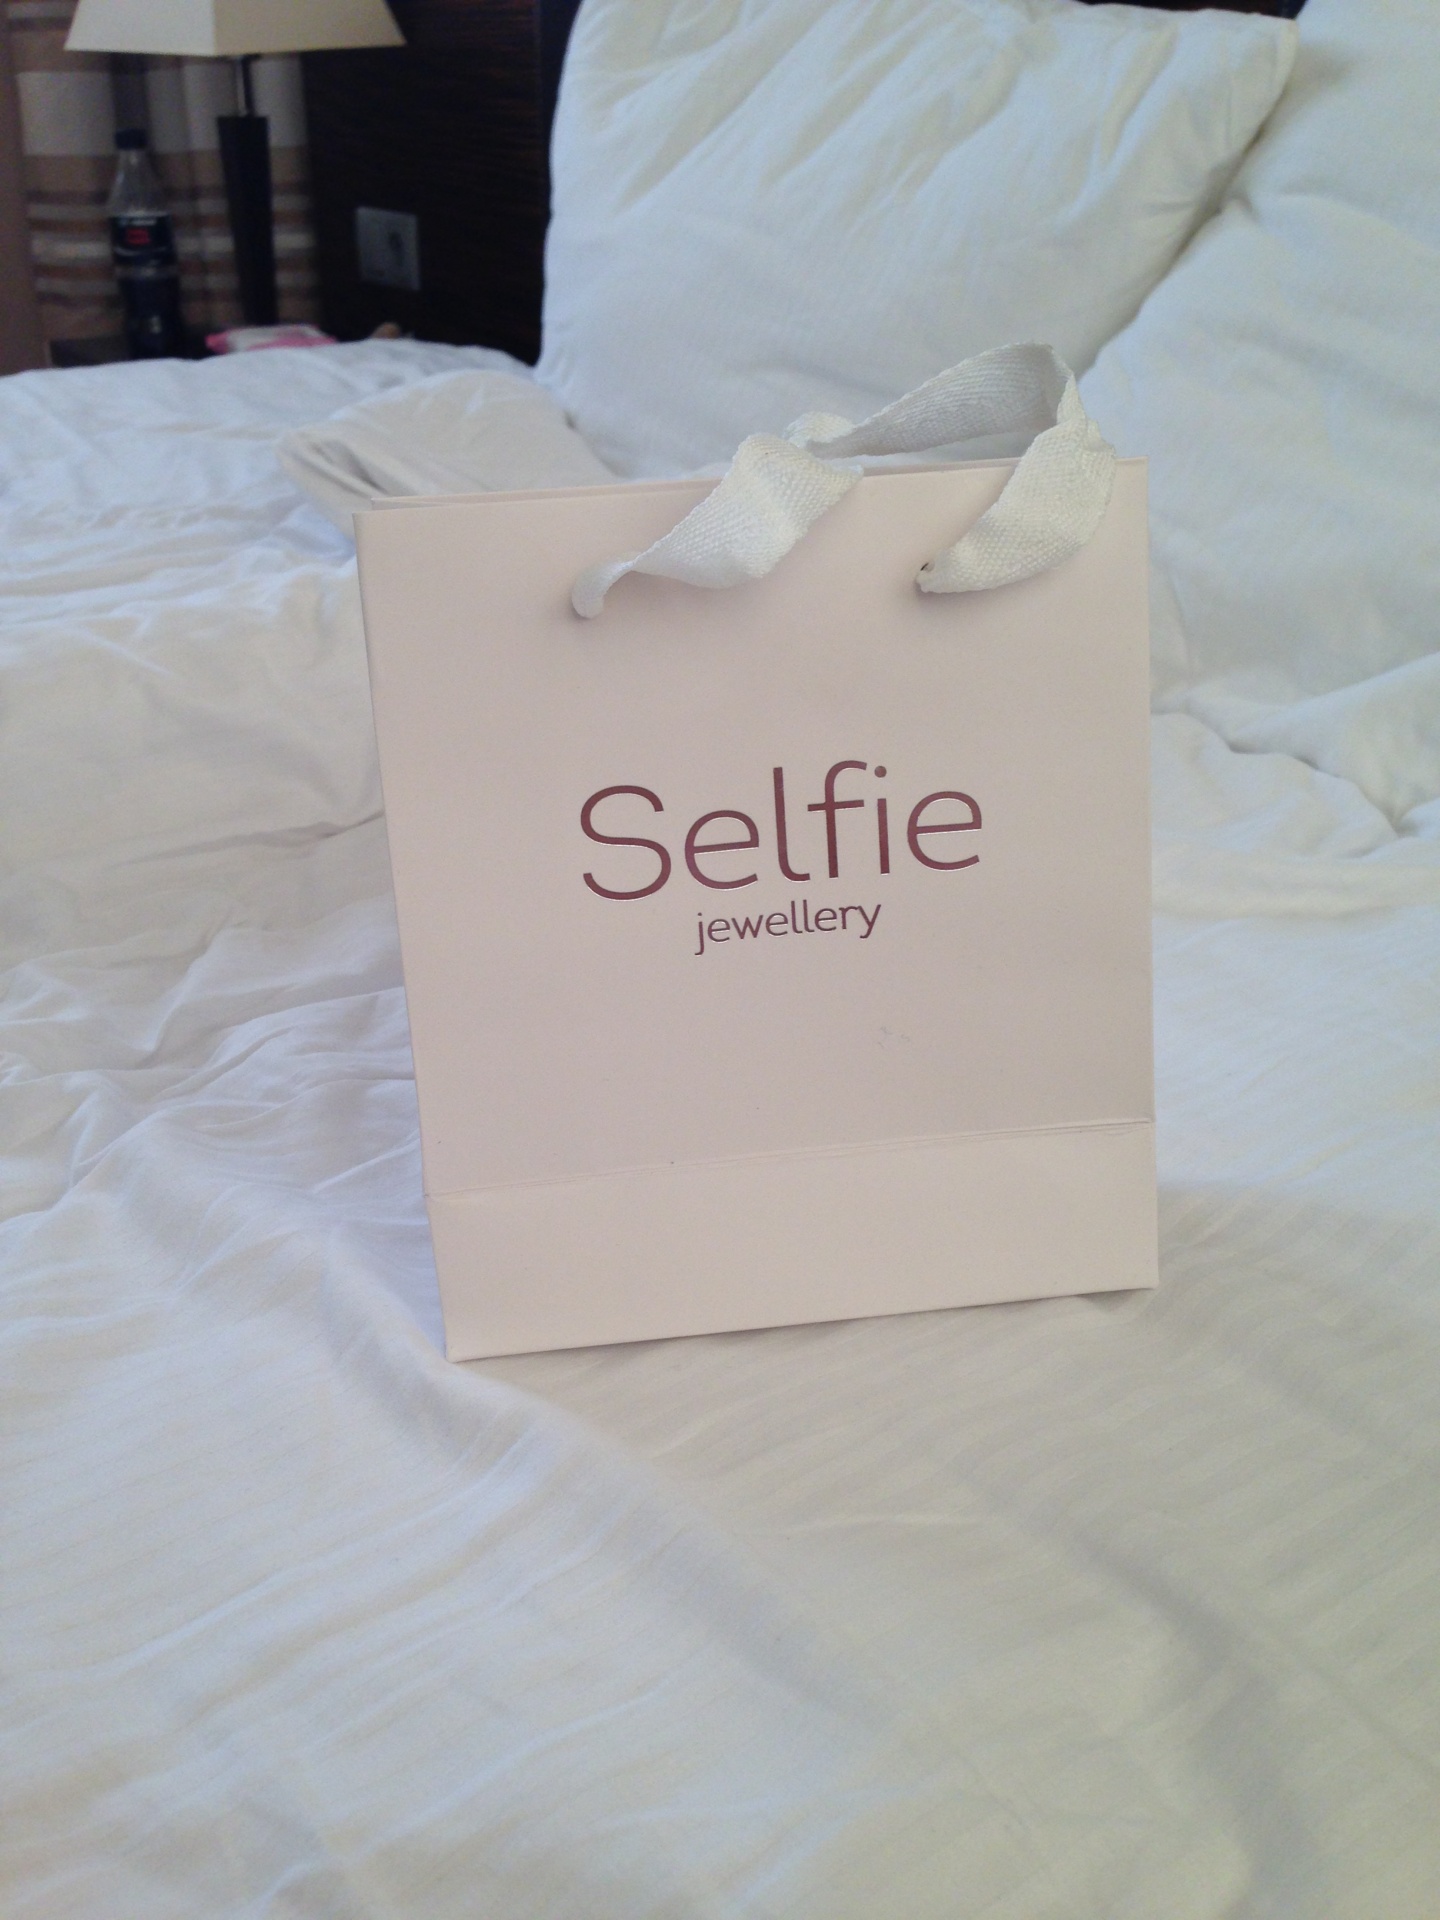 My cute purchase at selfie, Sopot